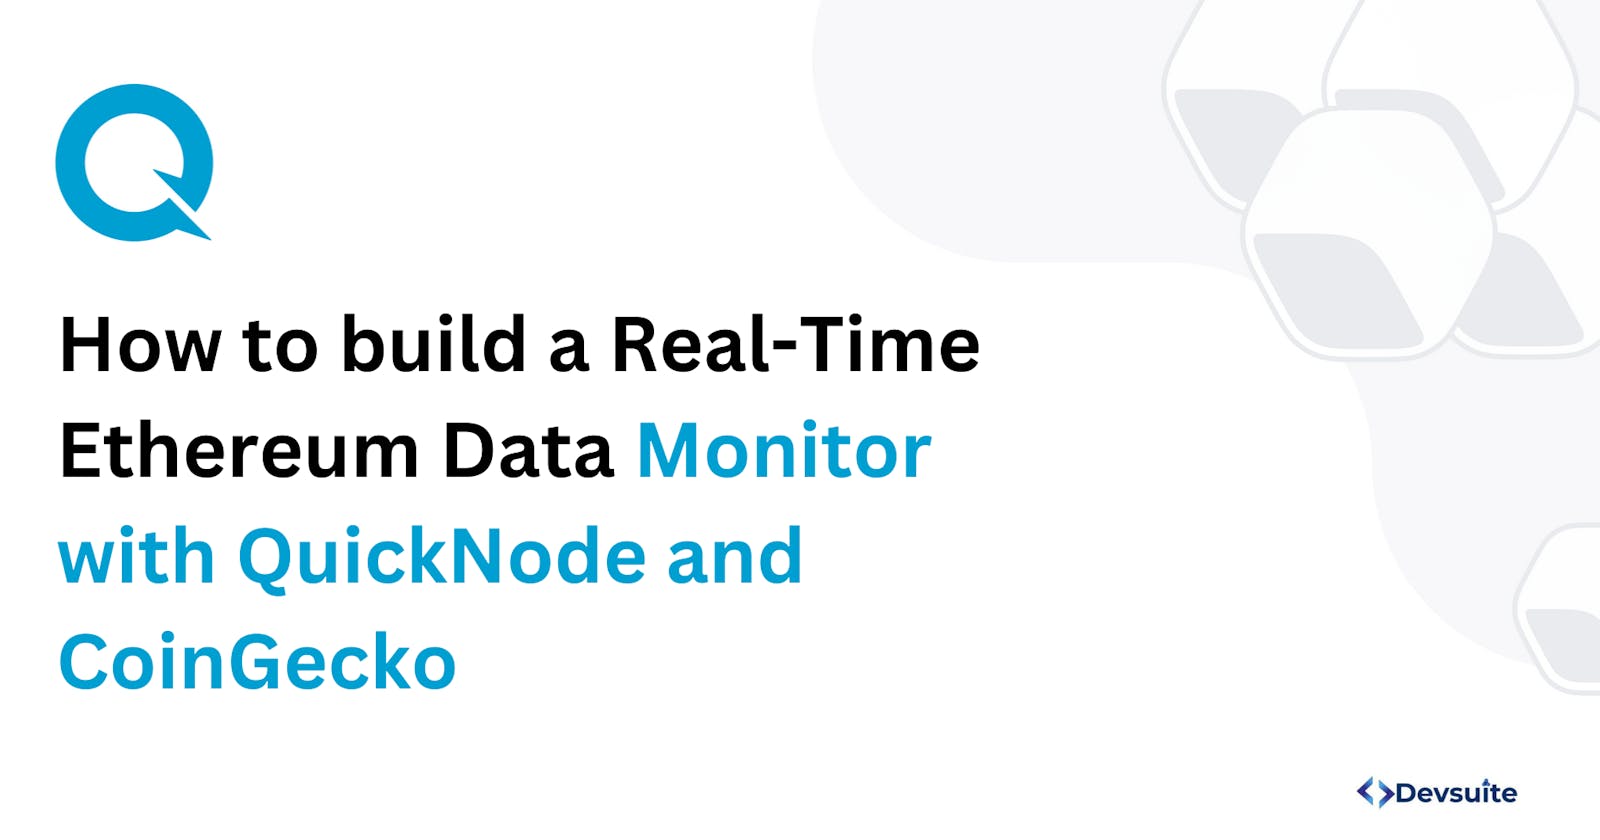 How to Build a Real-Time Ethereum Data Monitor with QuickNode and CoinGecko